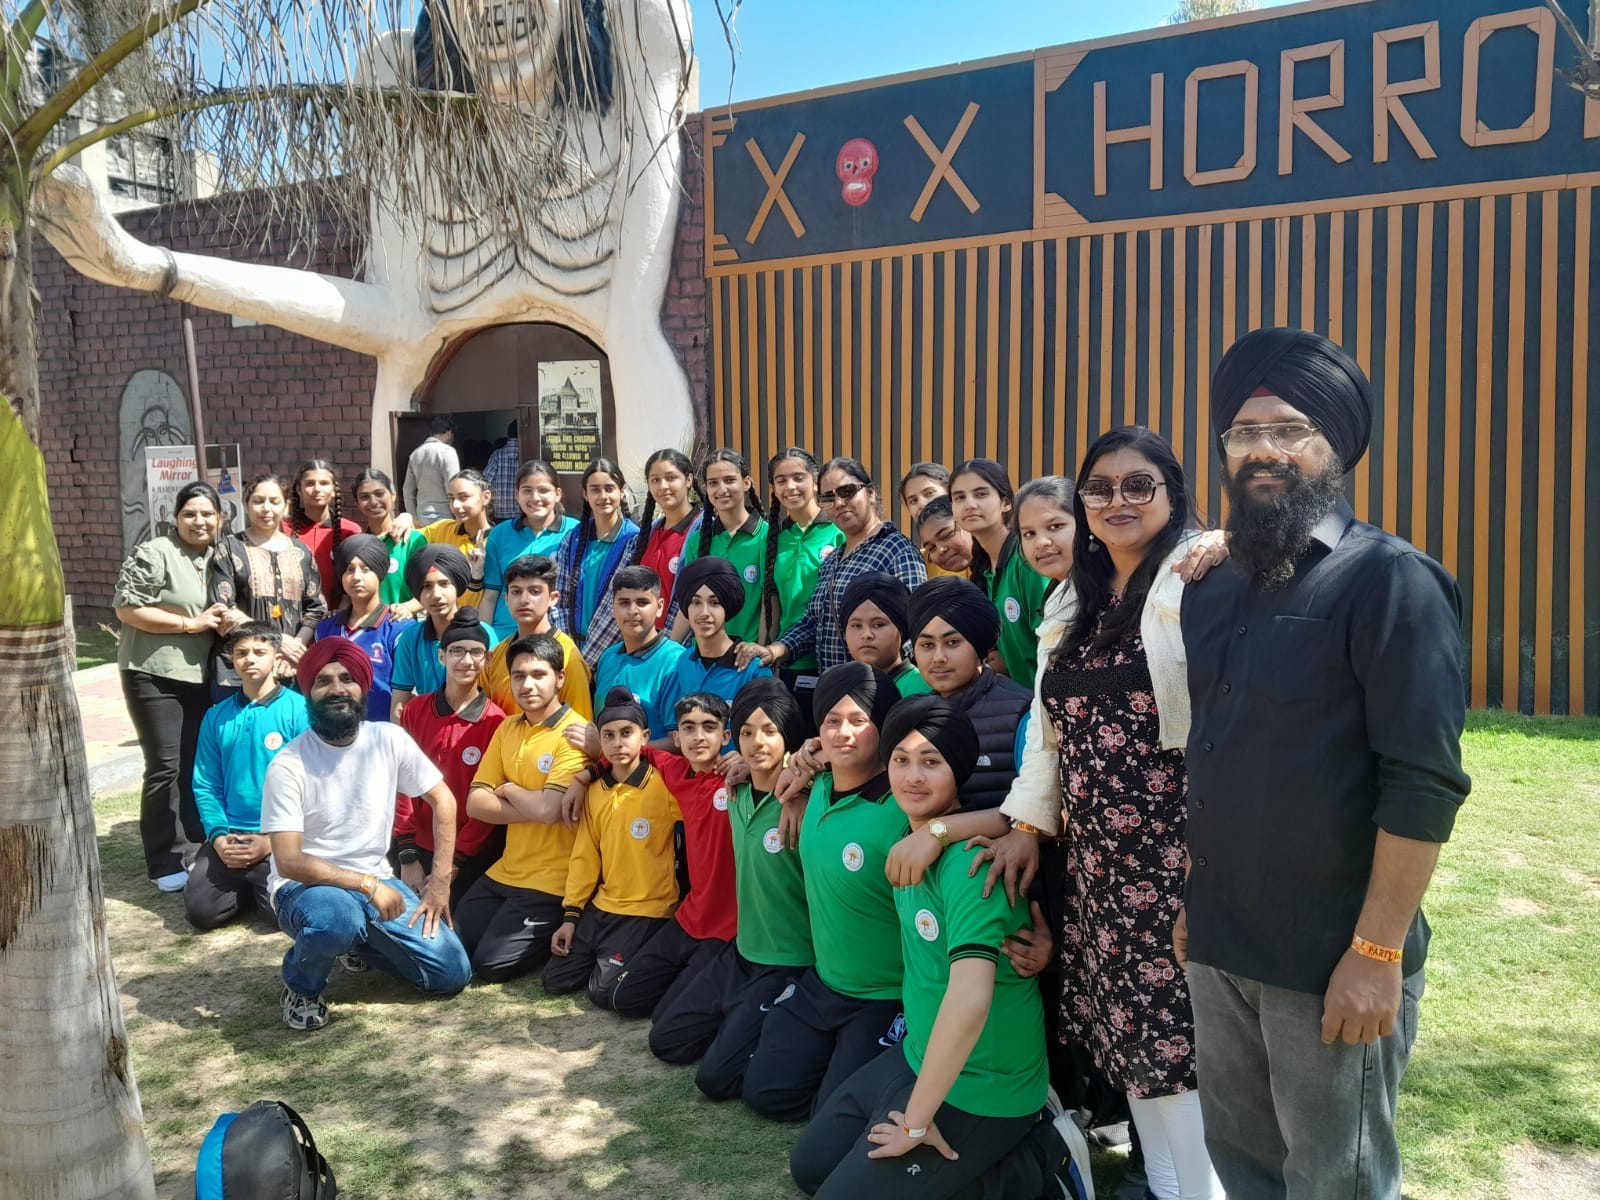 Drishti School embarked on an exhilarating one-day trip for the students of classes VI to XII